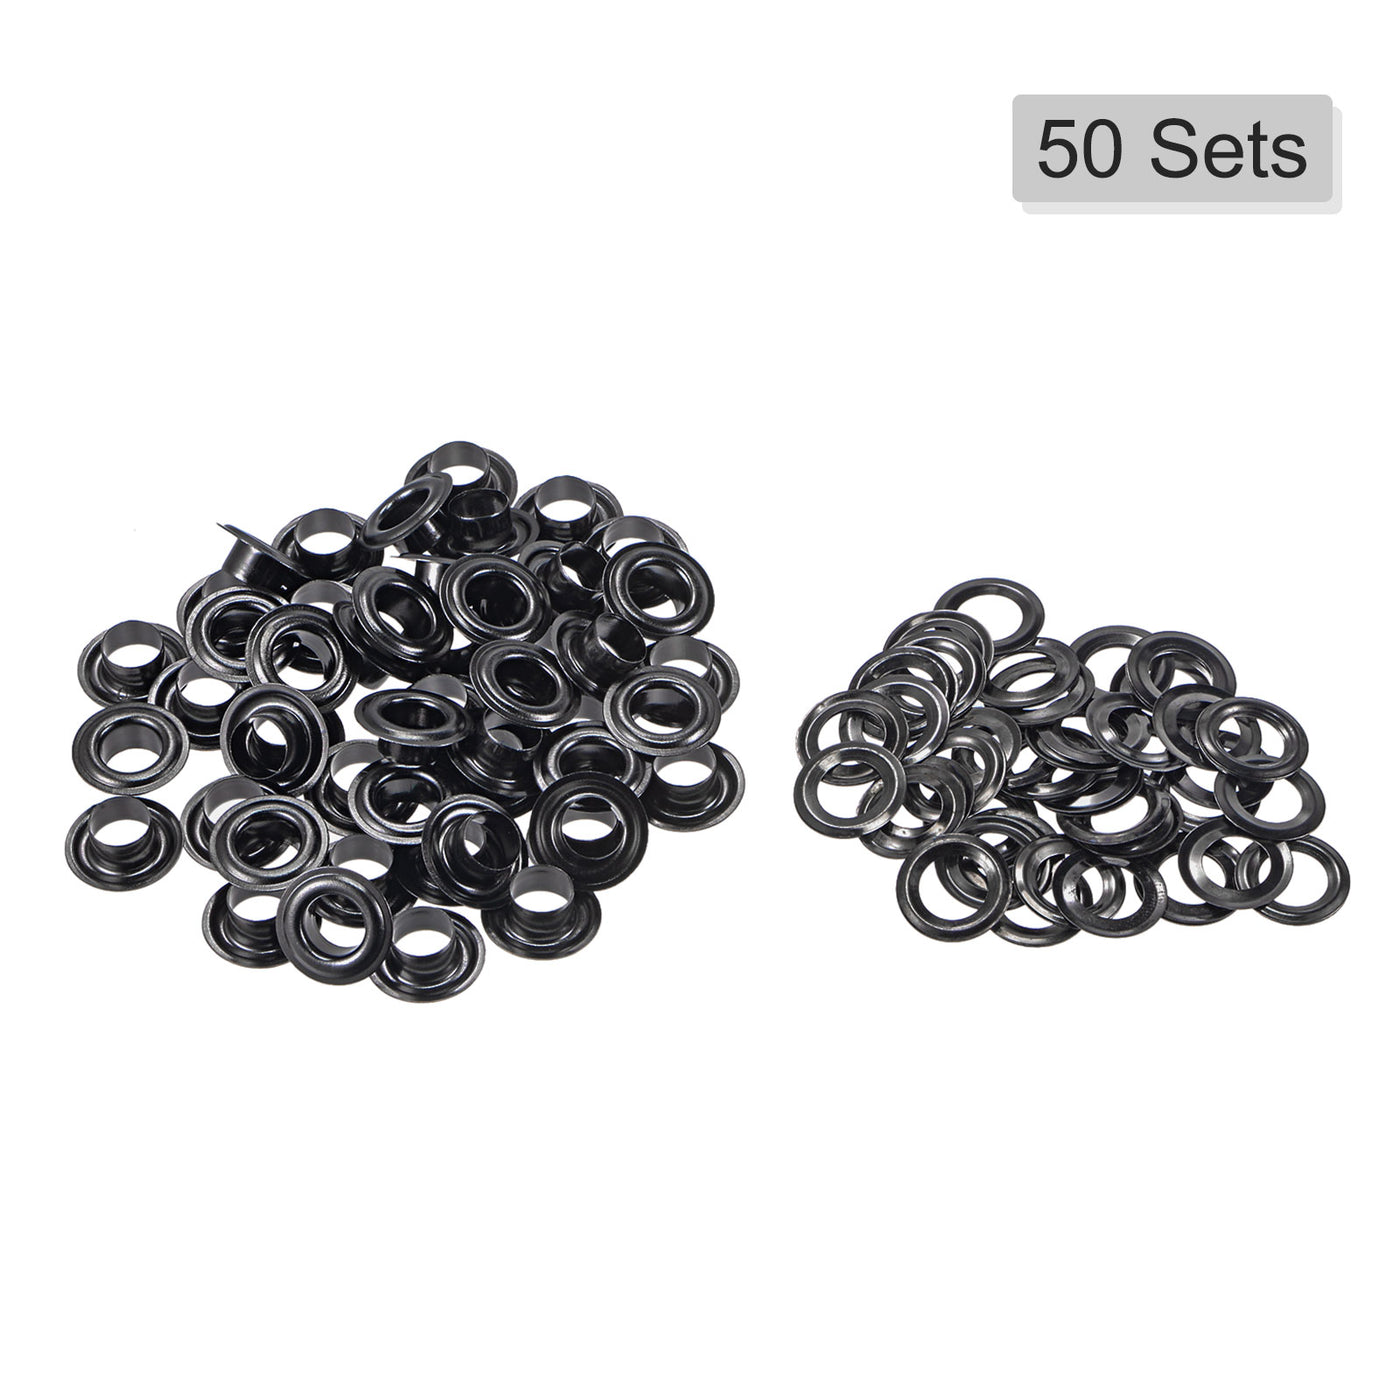 uxcell Uxcell 50Set 7.5mm Hole Copper Grommets Eyelets Black for Fabric Leather